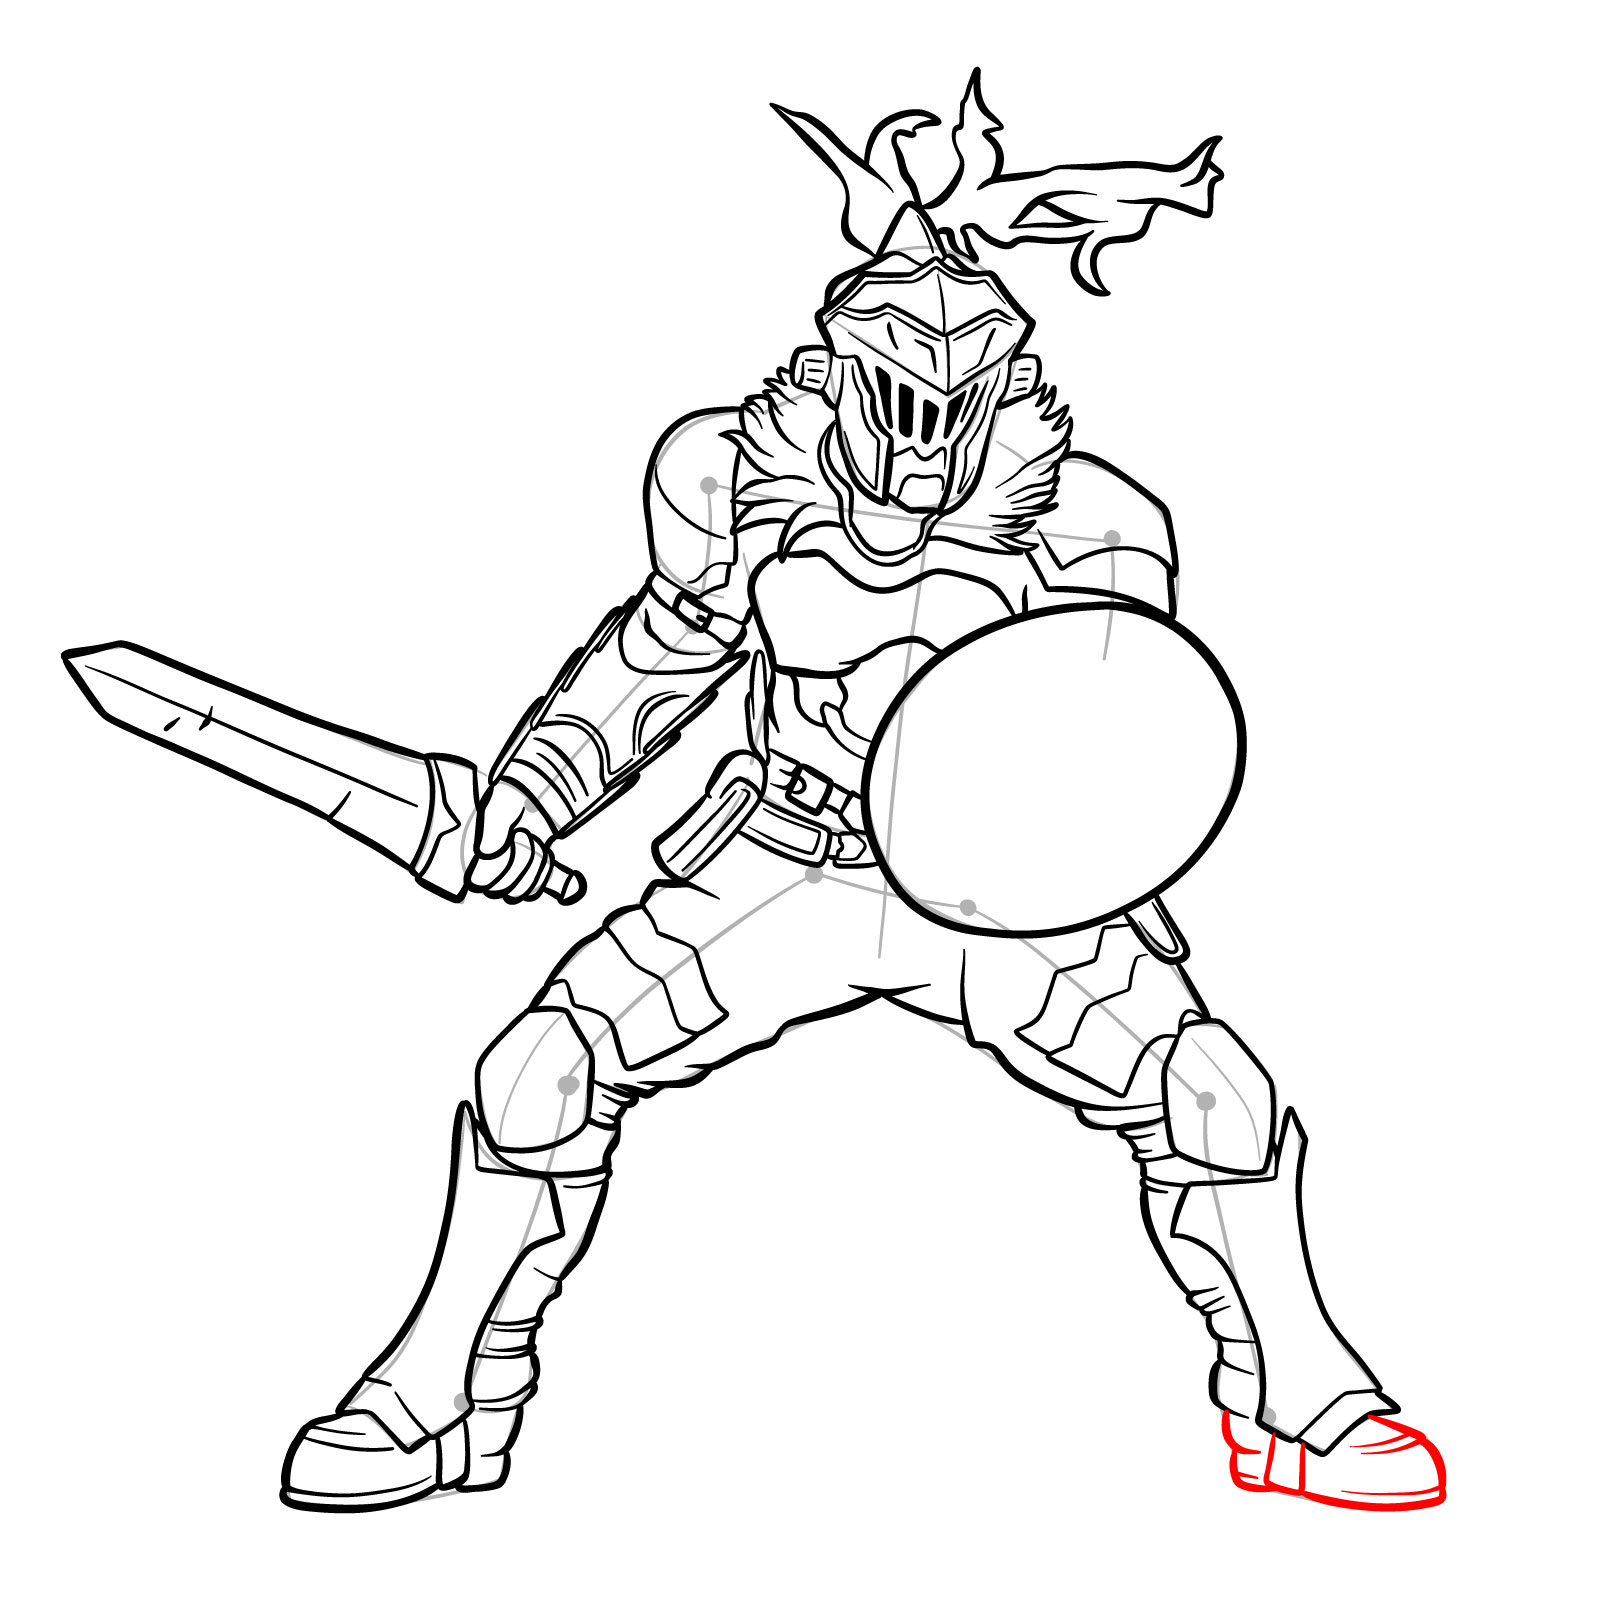 How to Draw Goblin Slayer in battle stance - step 37